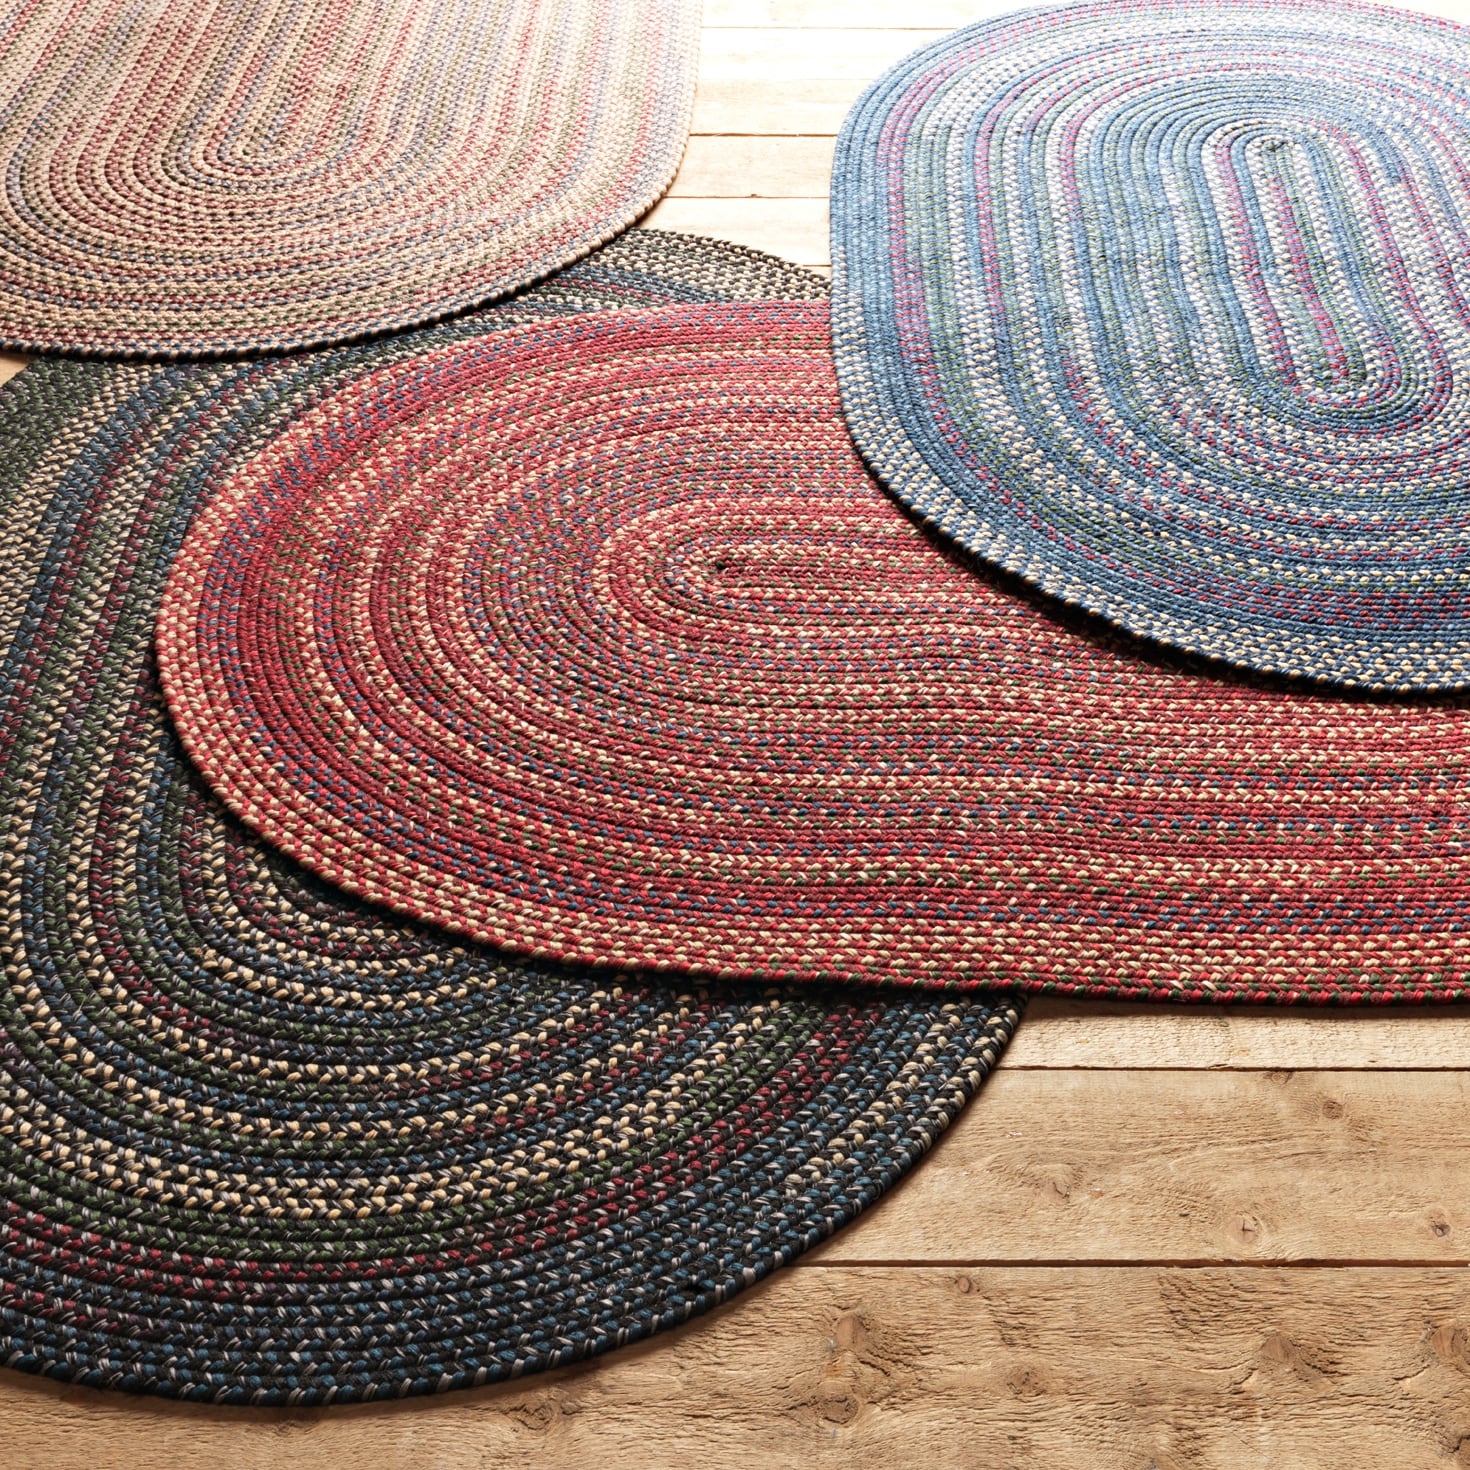 https://ak1.ostkcdn.com/images/products/is/images/direct/7bb675750996049bd9c8442ef05f837ec2aff0d1/Copper-Grove-Colville-Multi-colored-Reversible-Braided-Rug.jpg